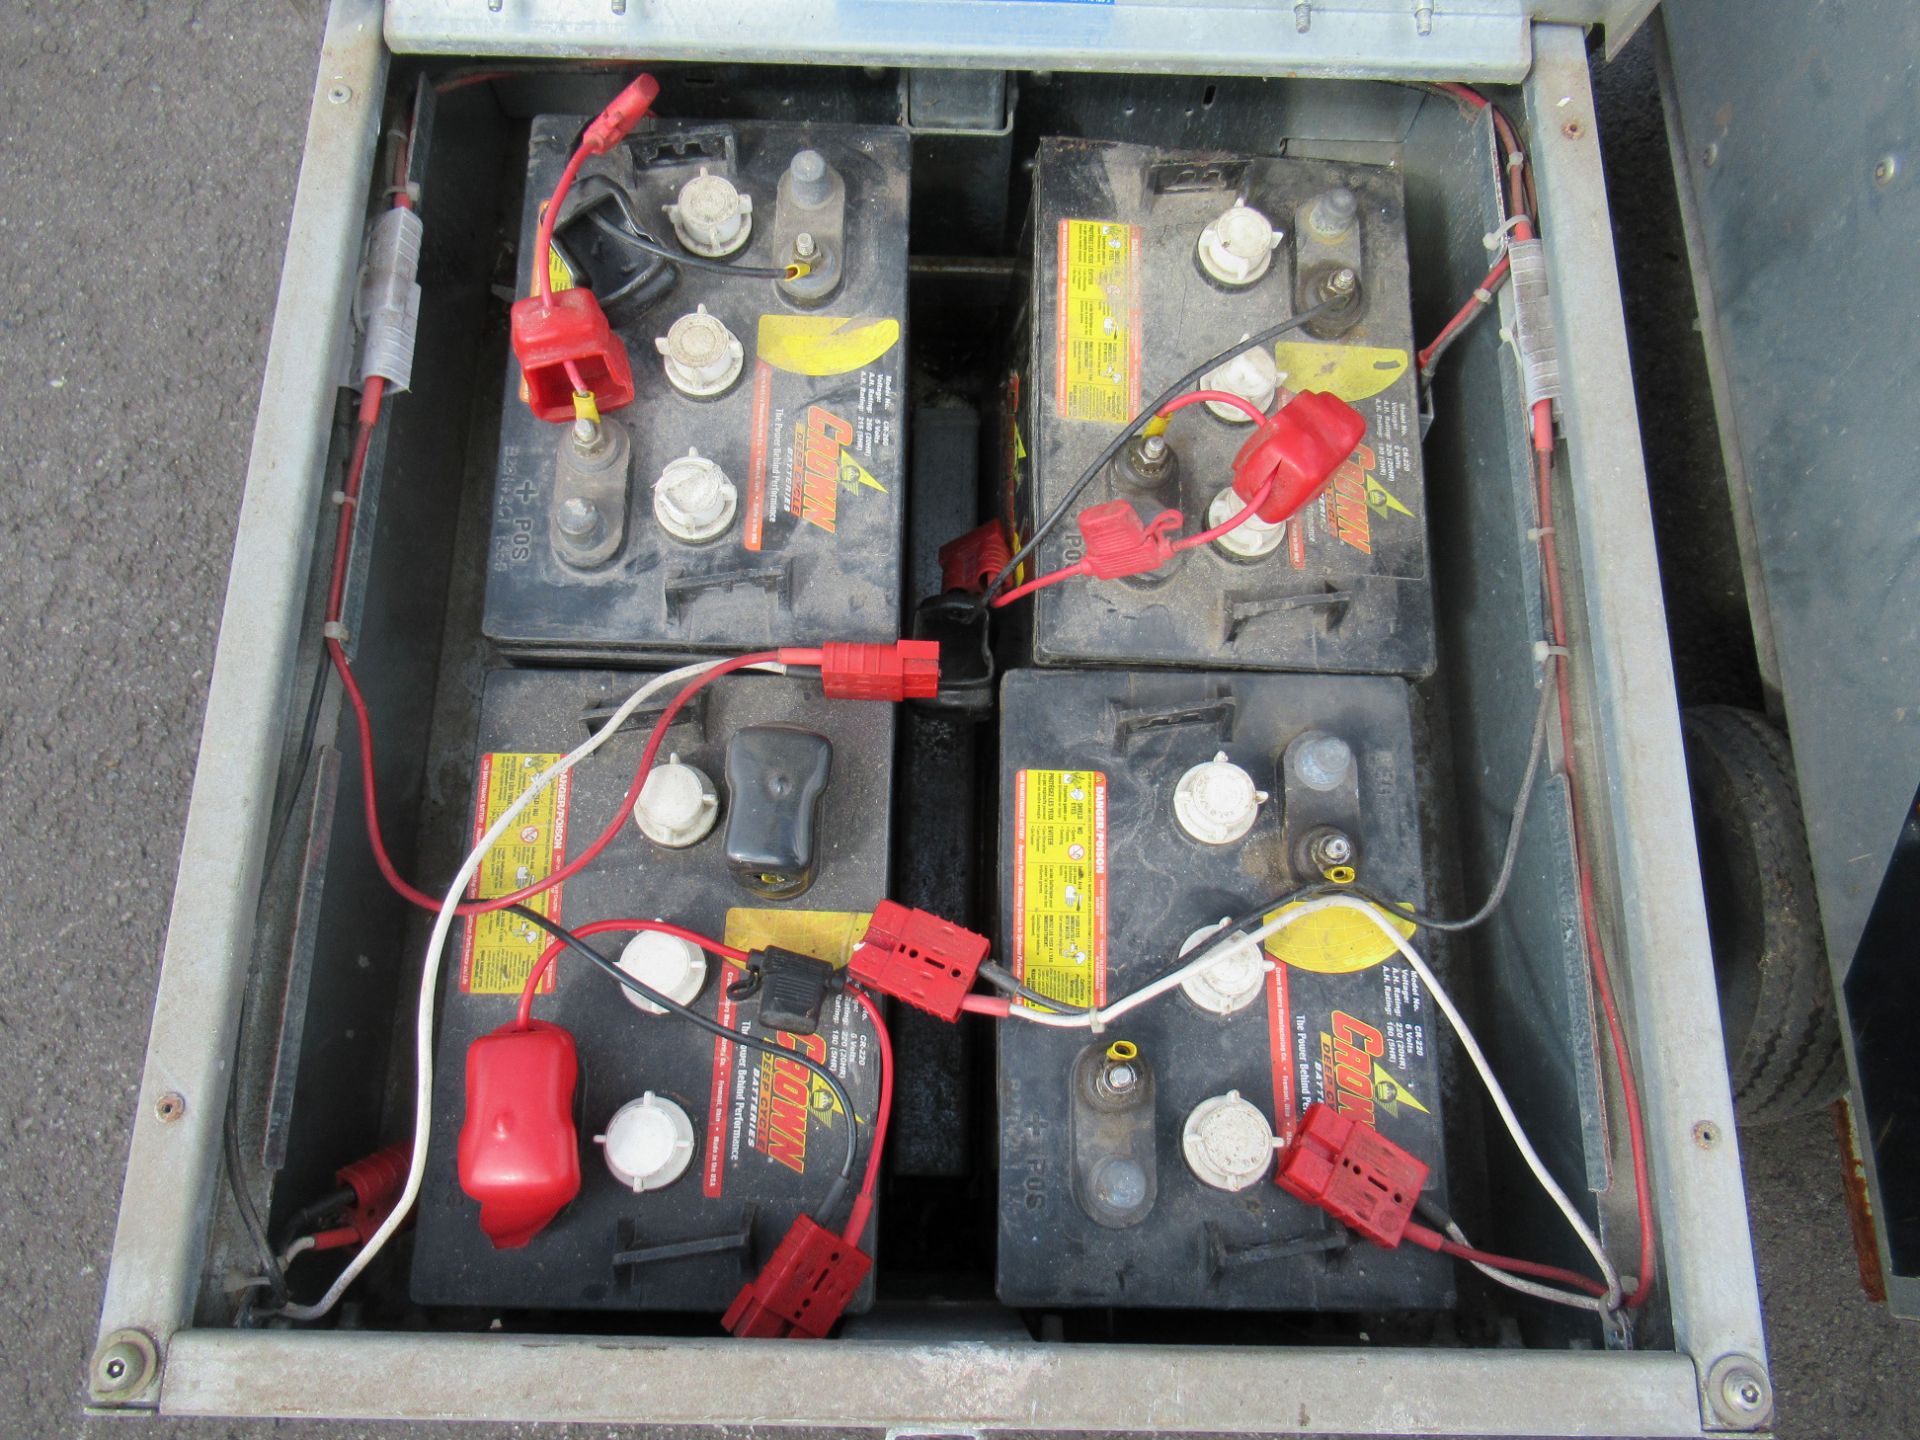 A Pair of Pike Signals Ltd "Pedestrian" Battery Powered Portable Traffic Light Units - Image 7 of 7